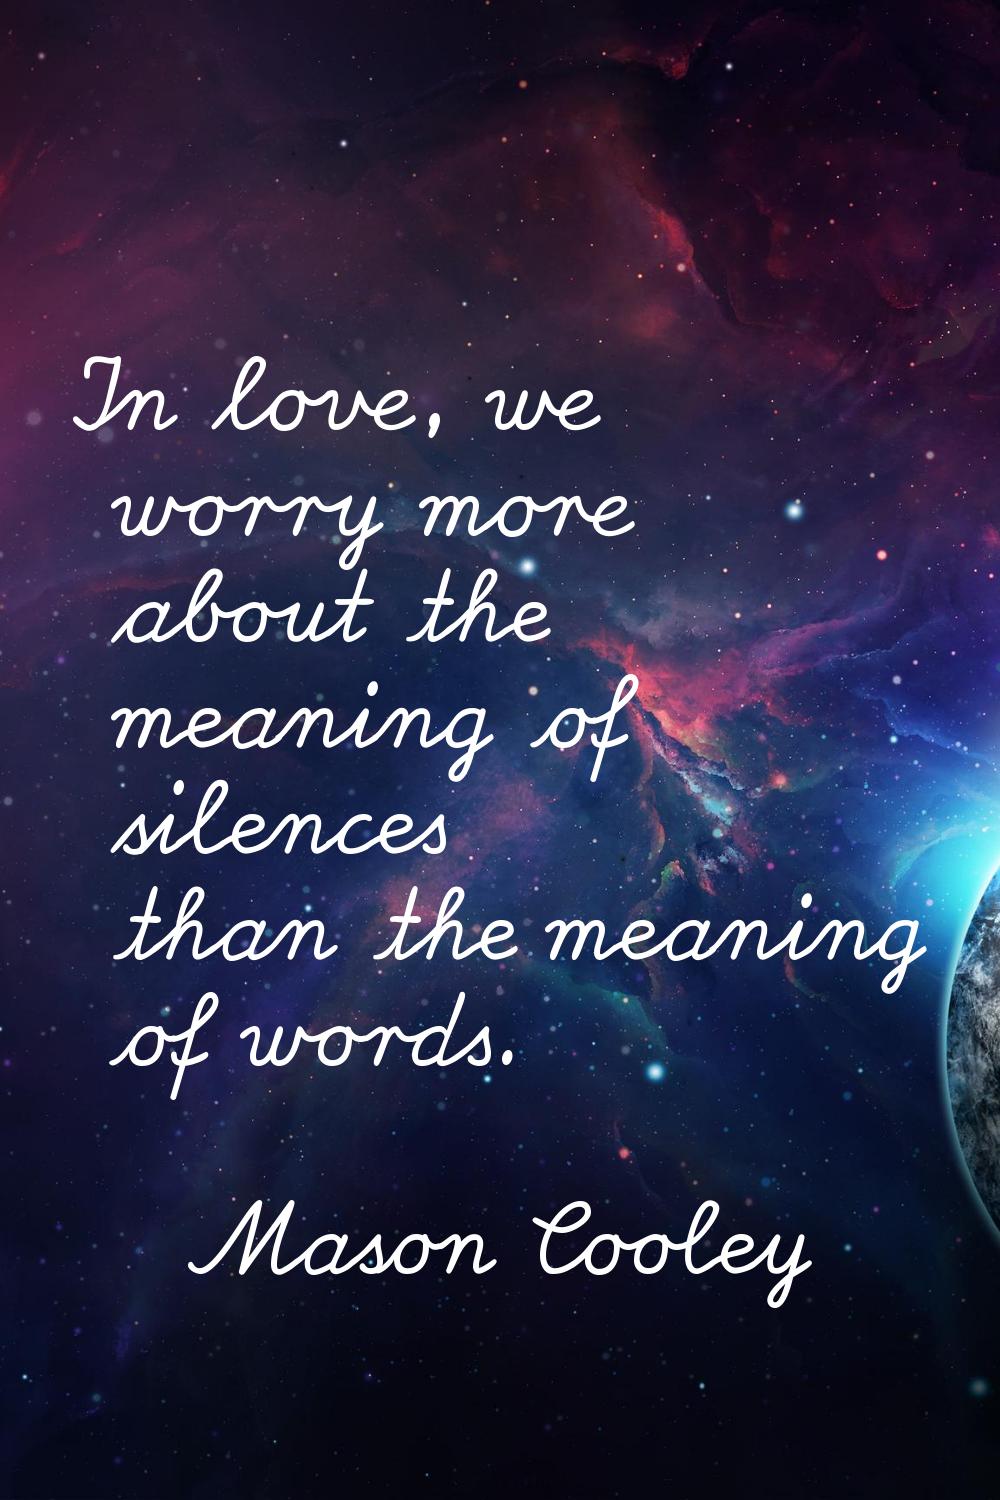 In love, we worry more about the meaning of silences than the meaning of words.